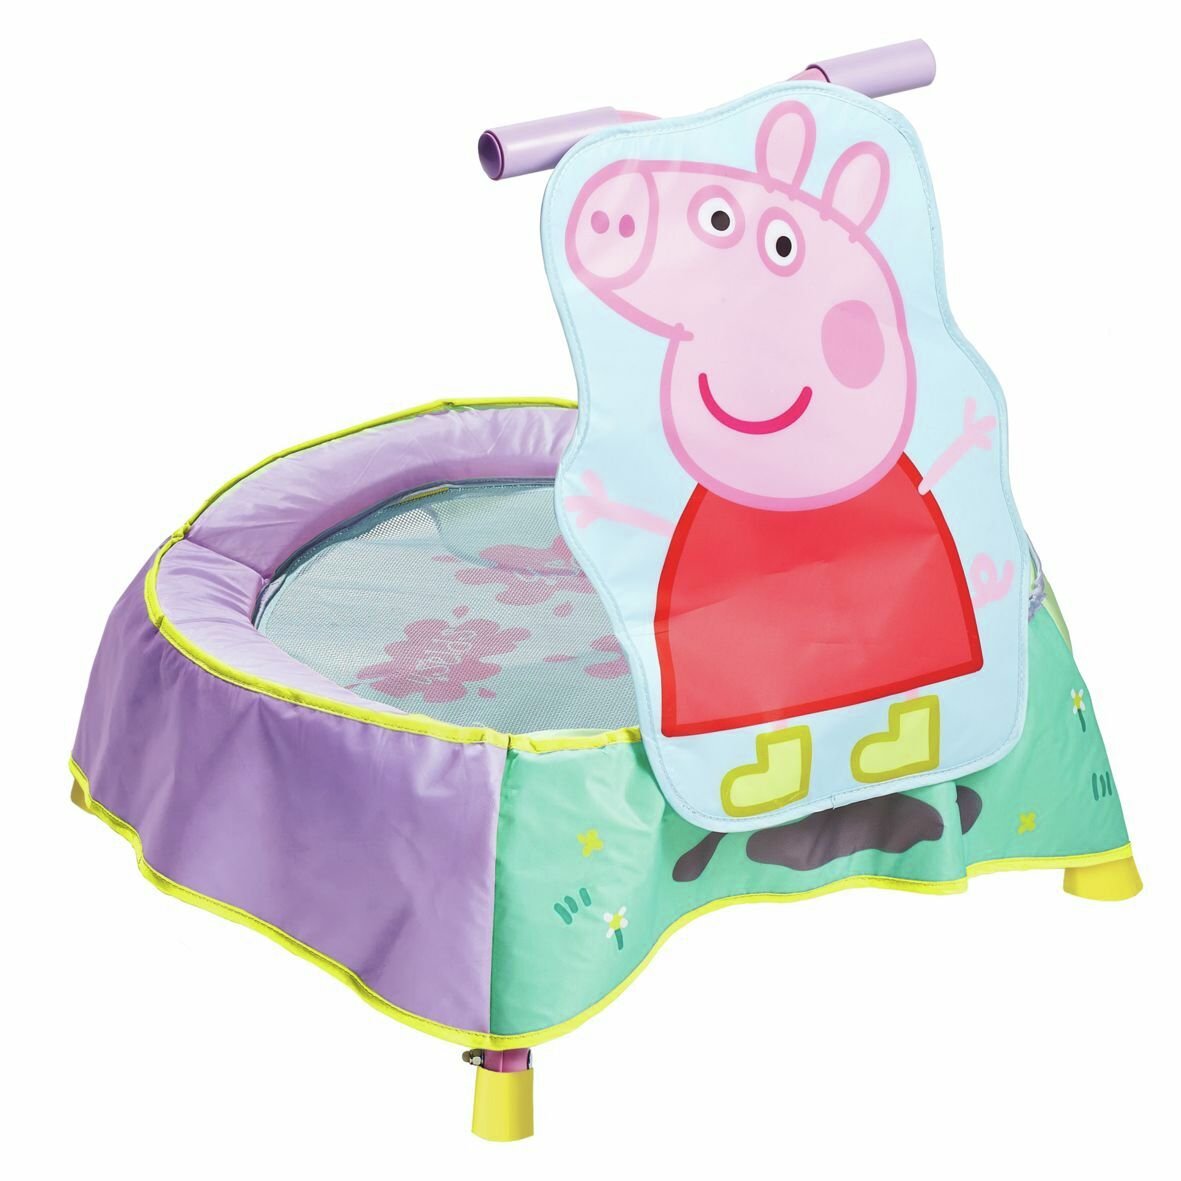 Peppa Pig Toddler Trampoline Review